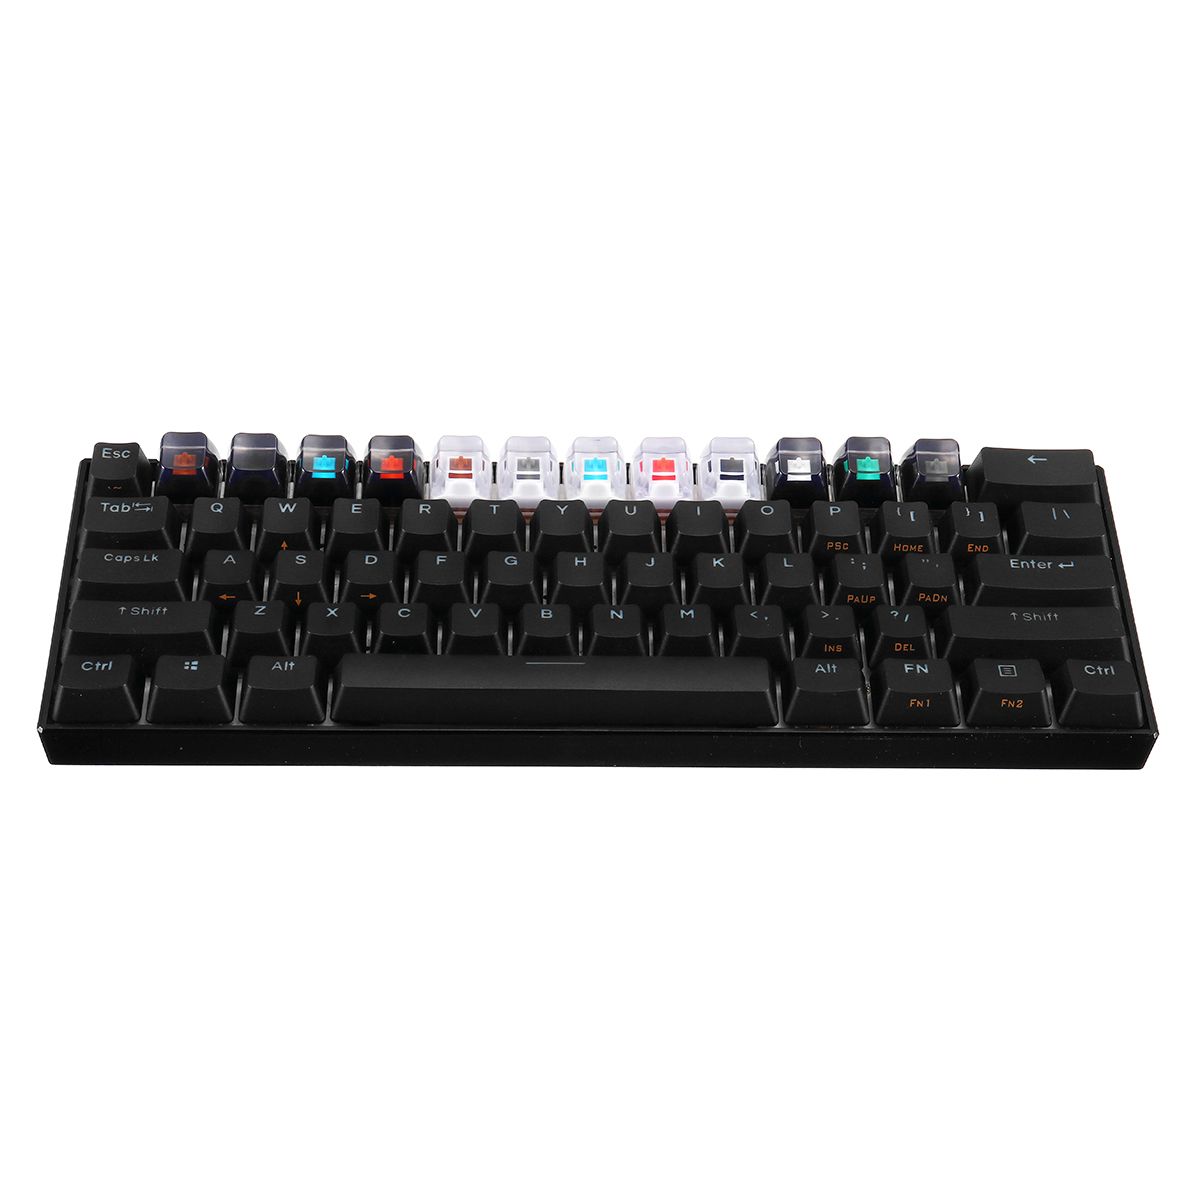 Feker-14PCS-Pack-Crystal-Keycaps-for-Mechanical-Gaming-Keyboard-1740538